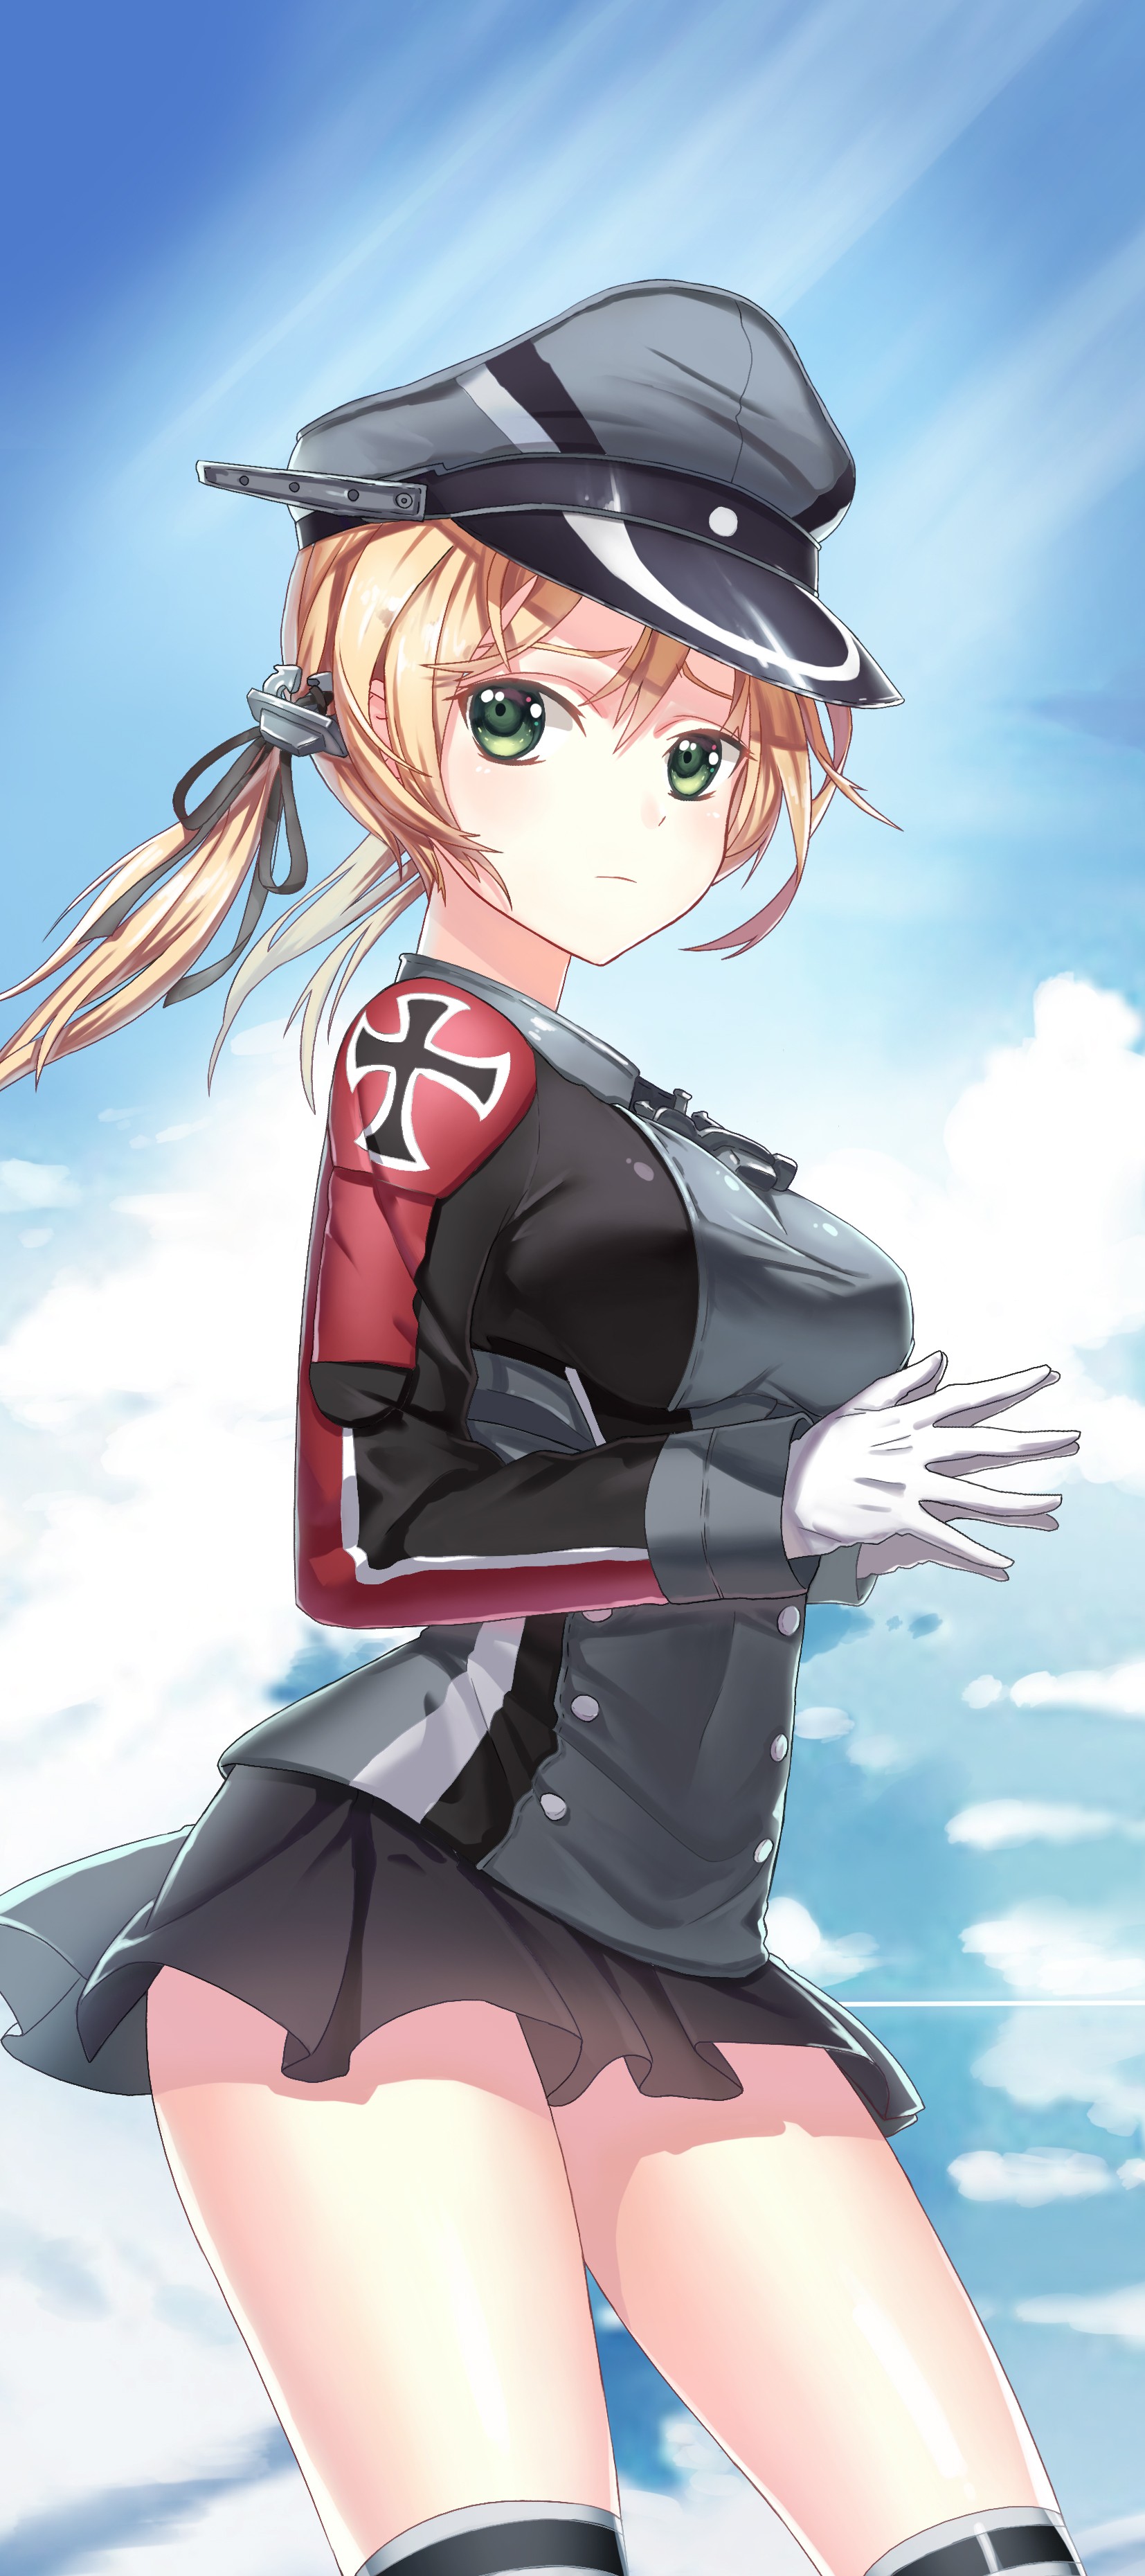 Anime 1654x3720 anime anime girls Kantai Collection Prinz Eugen (KanColle) uniform green eyes blonde hat thighs miniskirt black skirts women with hats Pixiv shoulder length hair looking at viewer boobs